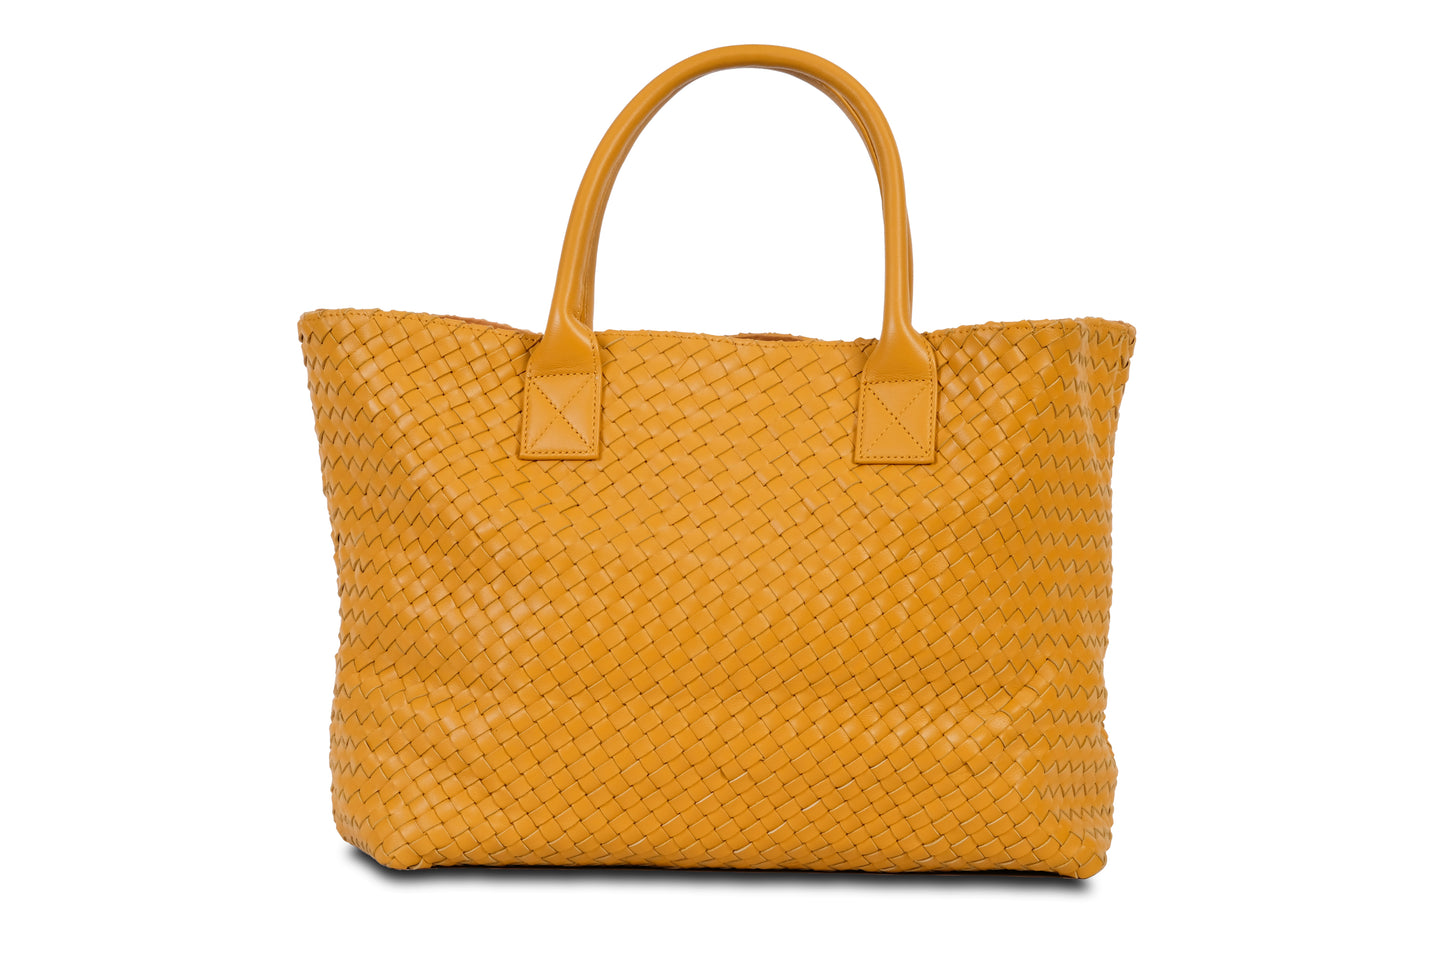 Destarina Autumn Yellow Crosshatch Leather Tote Bag Handbag made by Dewi Maya back view available at the best boutique in Upstate South Carolina Spartanburg Greenville Dewi Maya Boutique